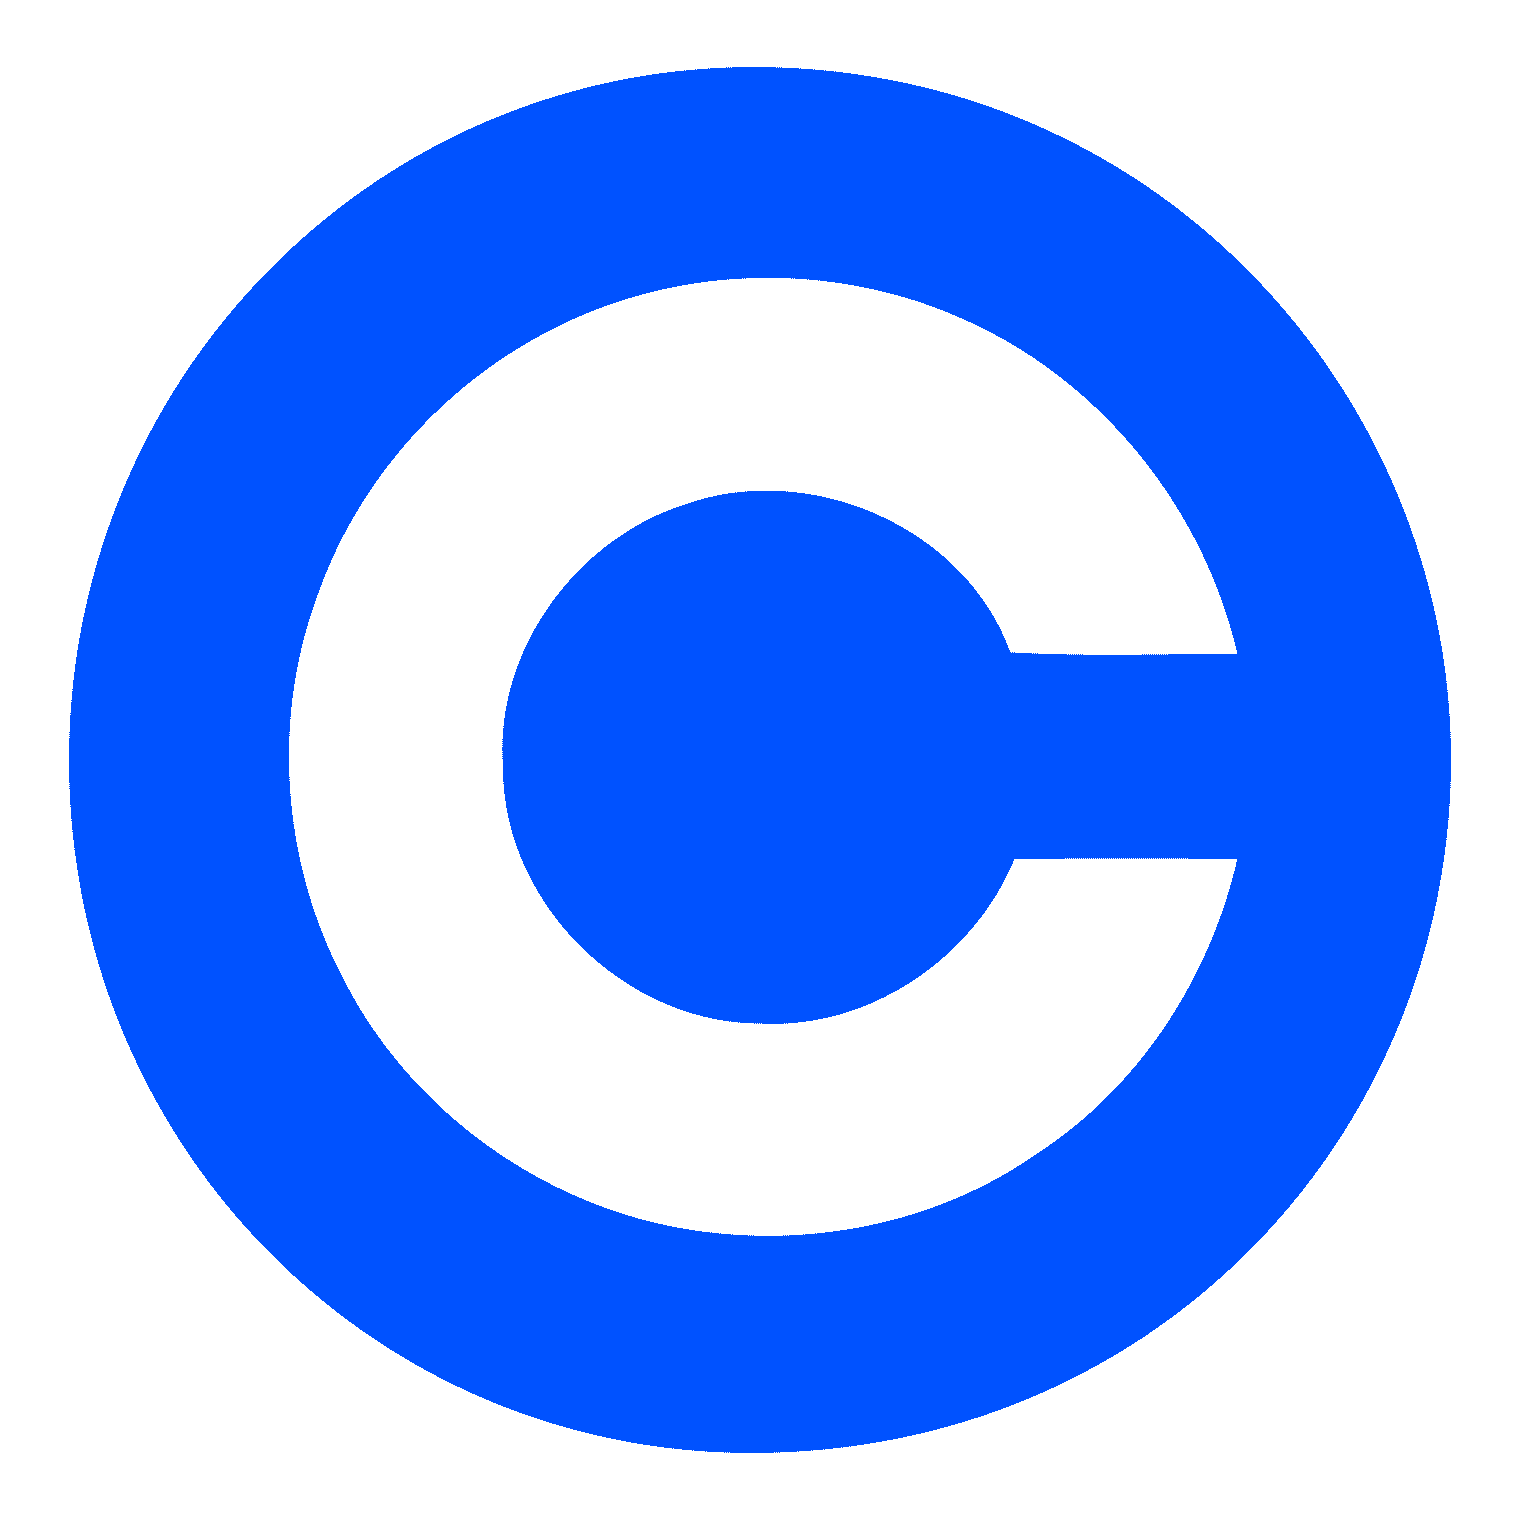 Coinbase logo featuring a stylized C inside a circle, symbolizing a digital currency exchange platform